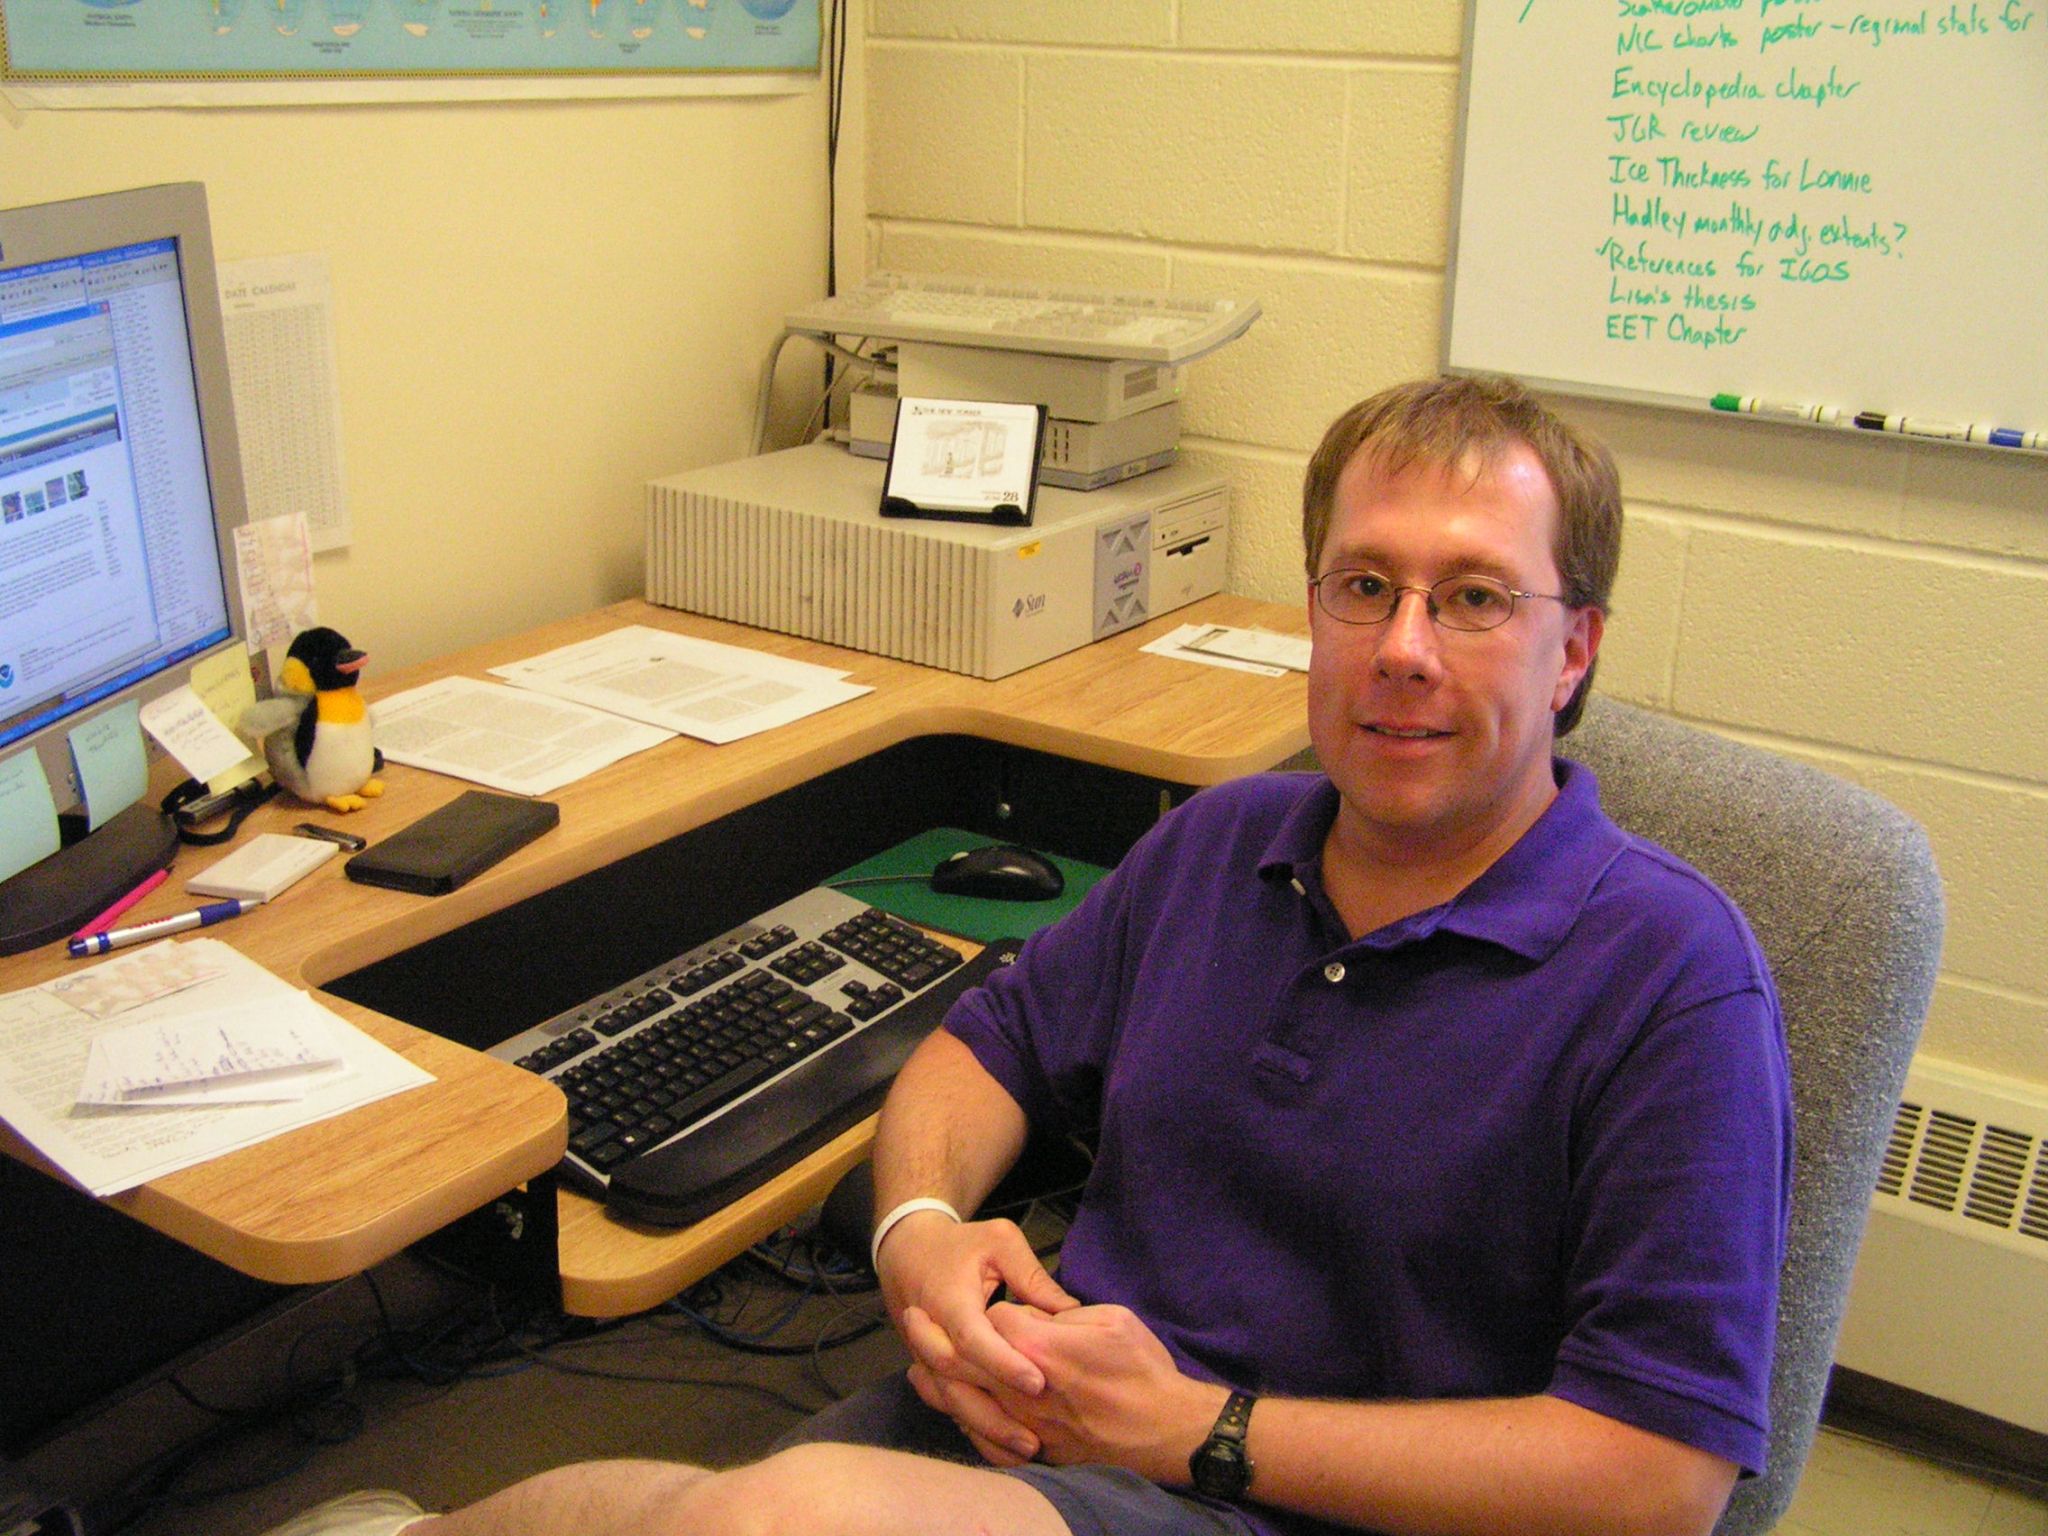 Walt Meier, wearing a purple polo shirt, and sitting at his desk. His hands are folded, and he's smiling at the camera. His desk has a few pieces of paper, a computer monitor, and an older modem. 